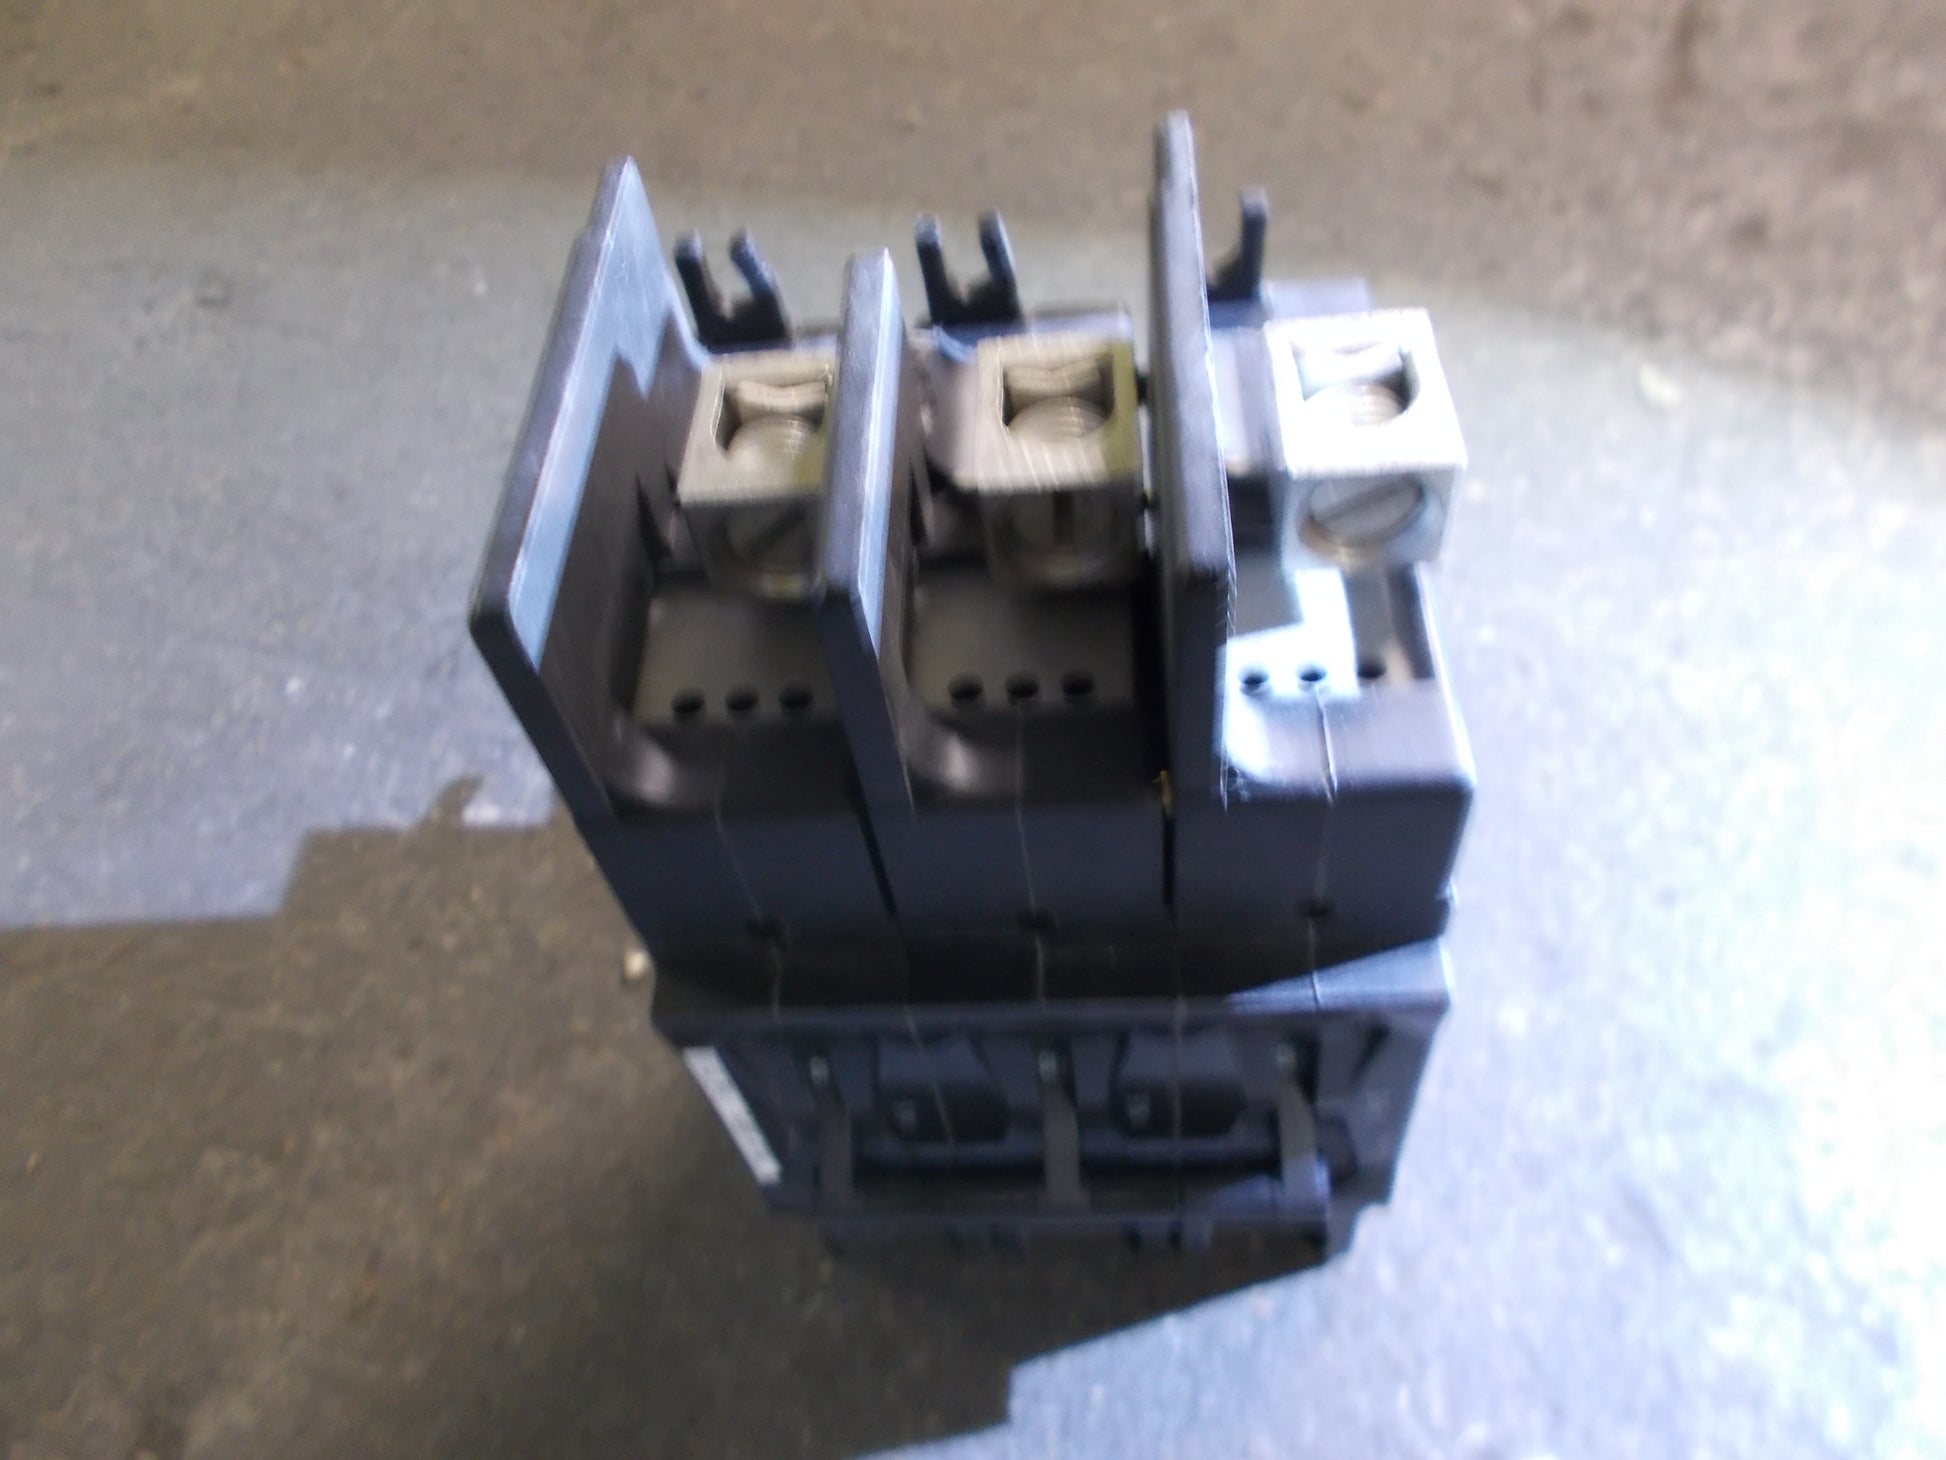 3 POLE 14.5 AMP "219 MULTI-POLE" SERIES HYDRAULIC MAGNETIC CIRCUIT BREAKER PROTECTOR/FOR MANUAL MOTOR CONTROLLER APPLICATIONS 480/50-60/1 OR 3